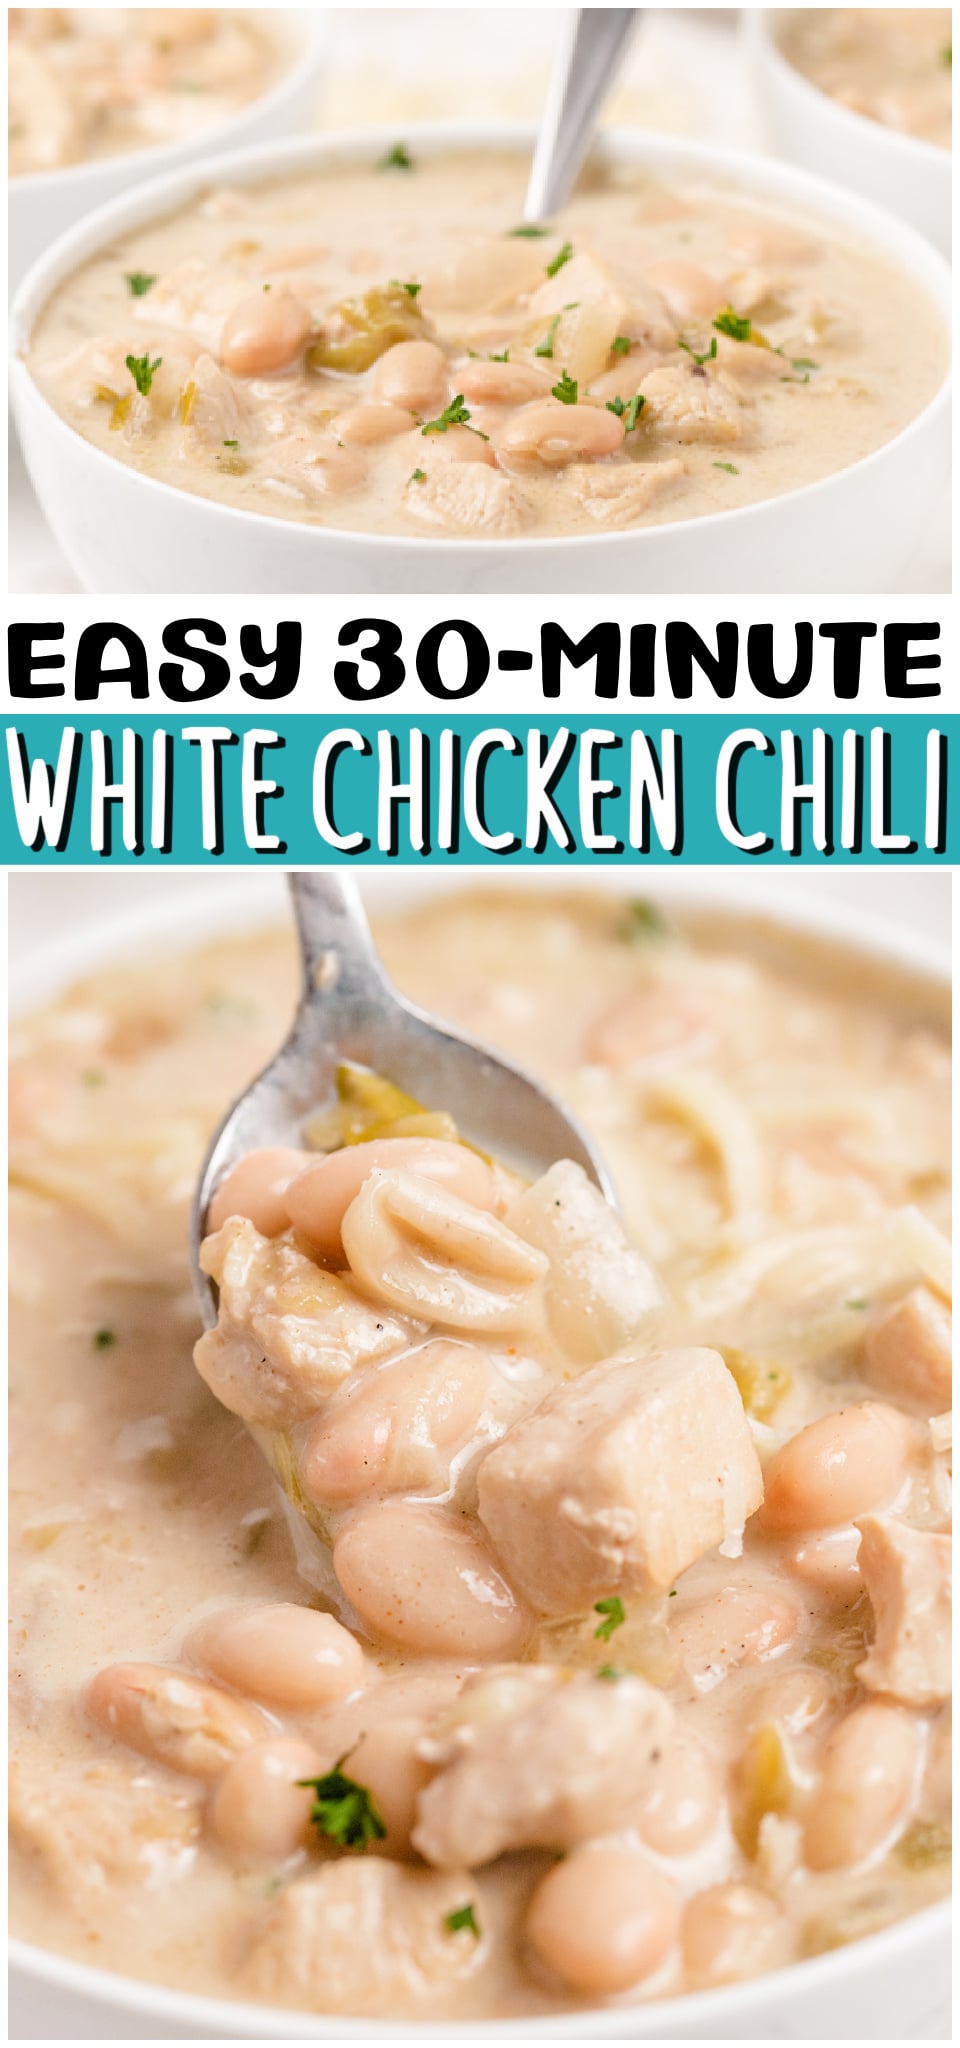 White Chicken Chili is a delicious & comforting meal packed with white beans, chicken, and green chilies. Takes only 30 minutes from start to finish!